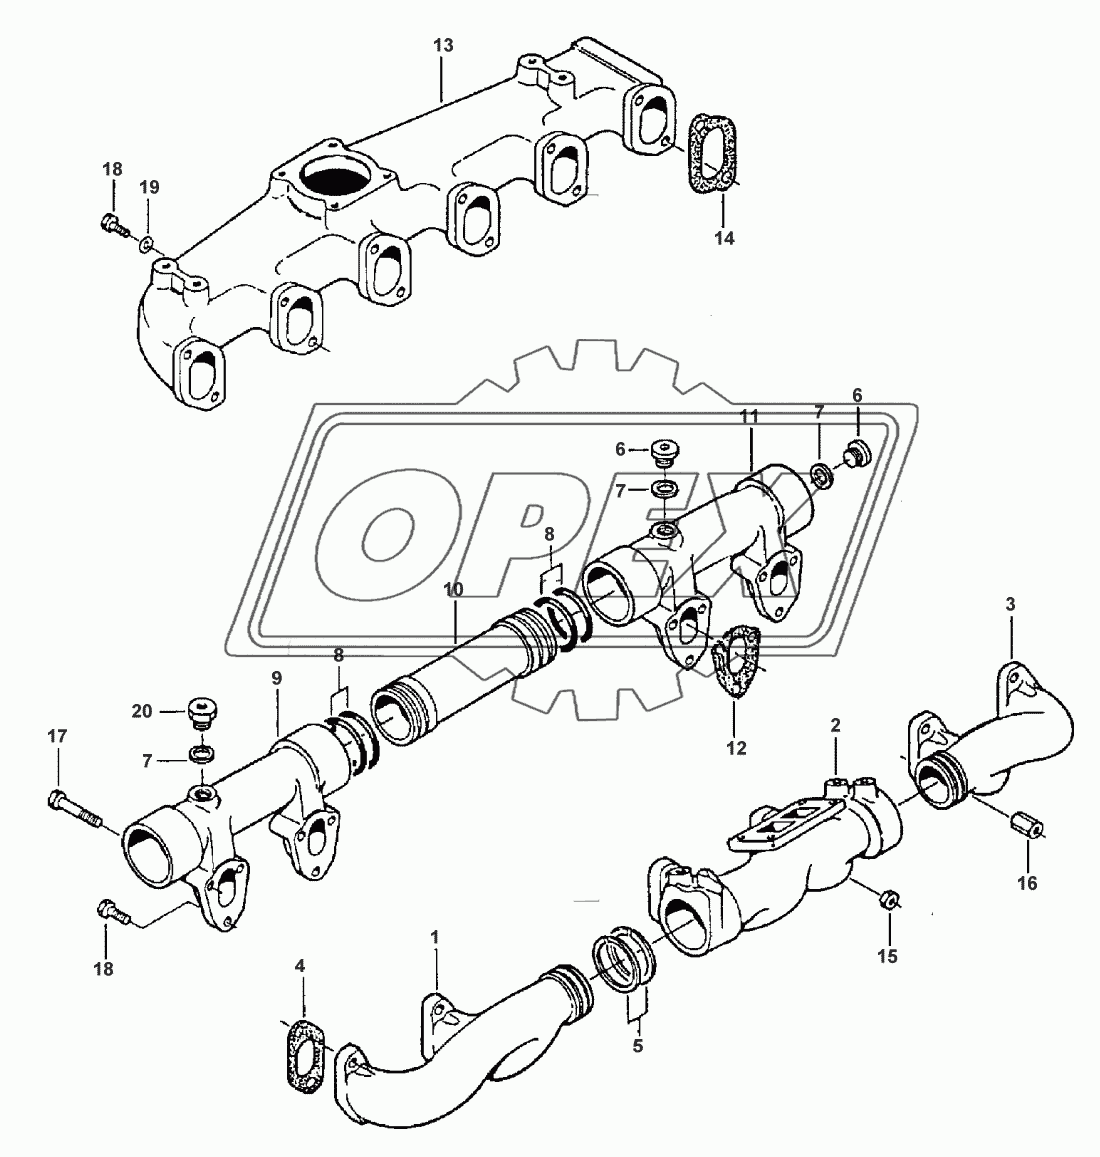 TURBOCHARGER-INLET AND EXHAUST MANIFOLD - FROM NO E 7656